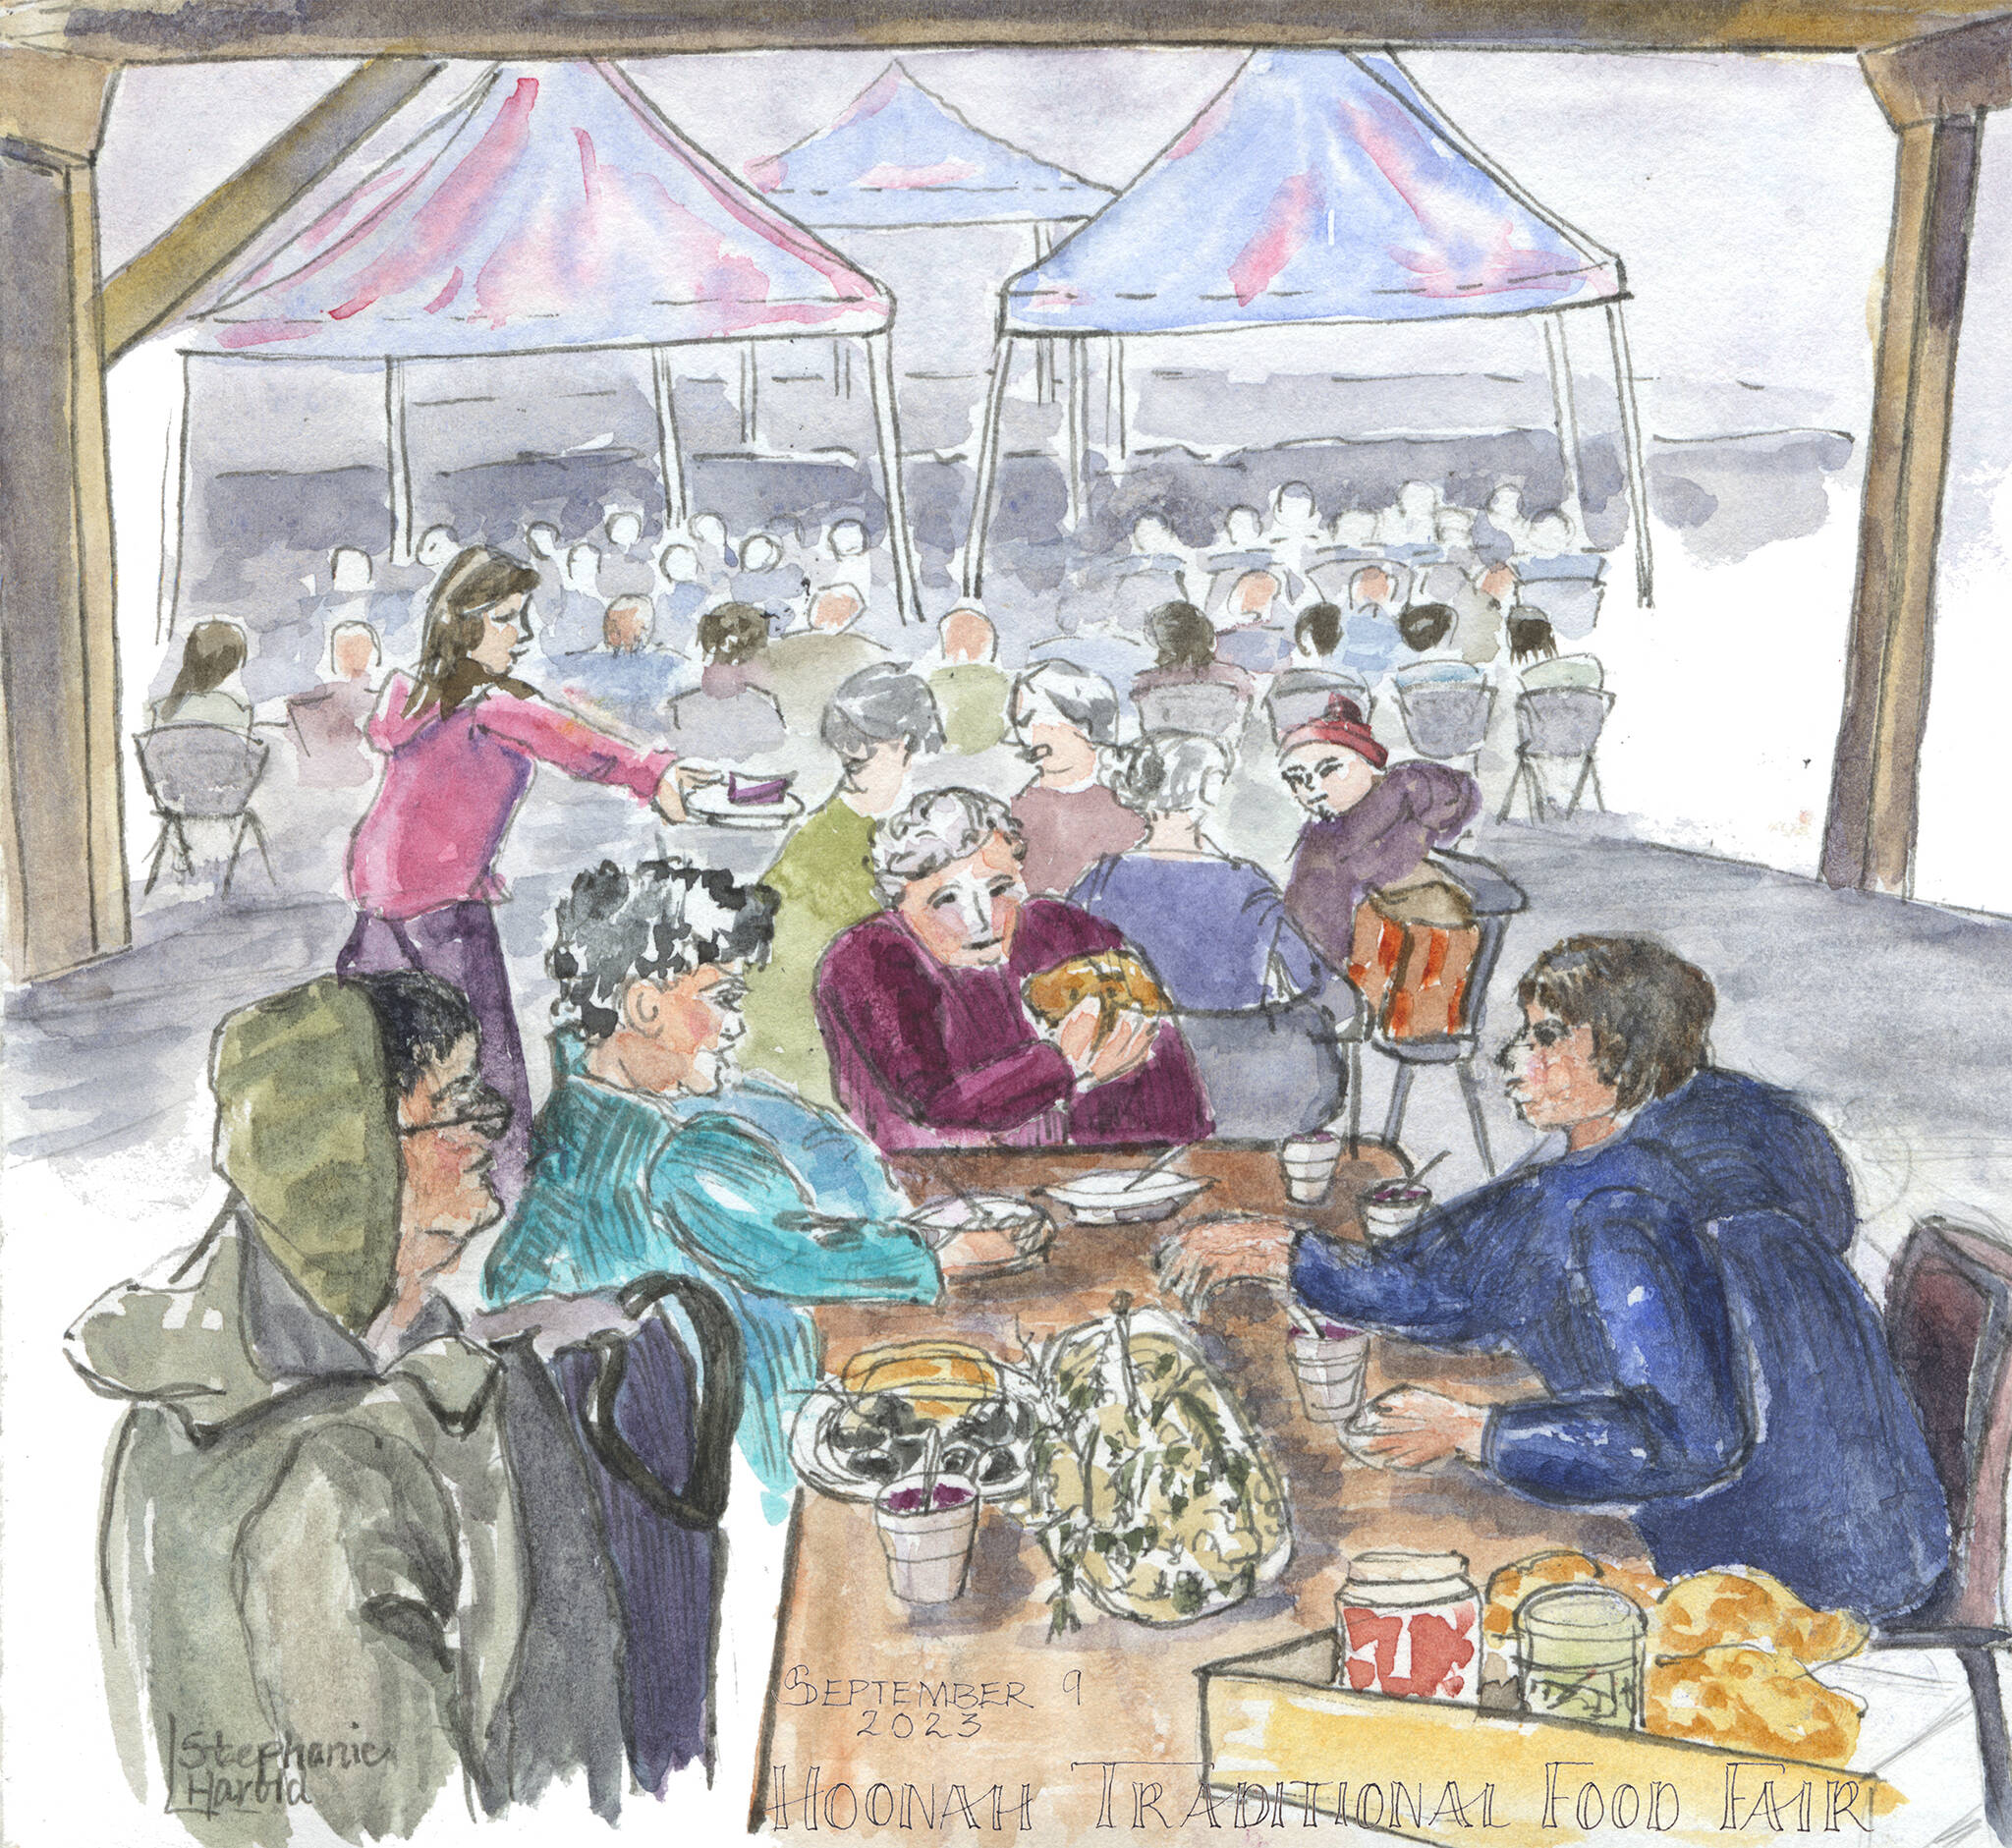 A sketch shows people gathering around tables under tents at the annual Traditional Food Fair in Hoonah on Sept. 9. (Sketch by Stephanie Harold)